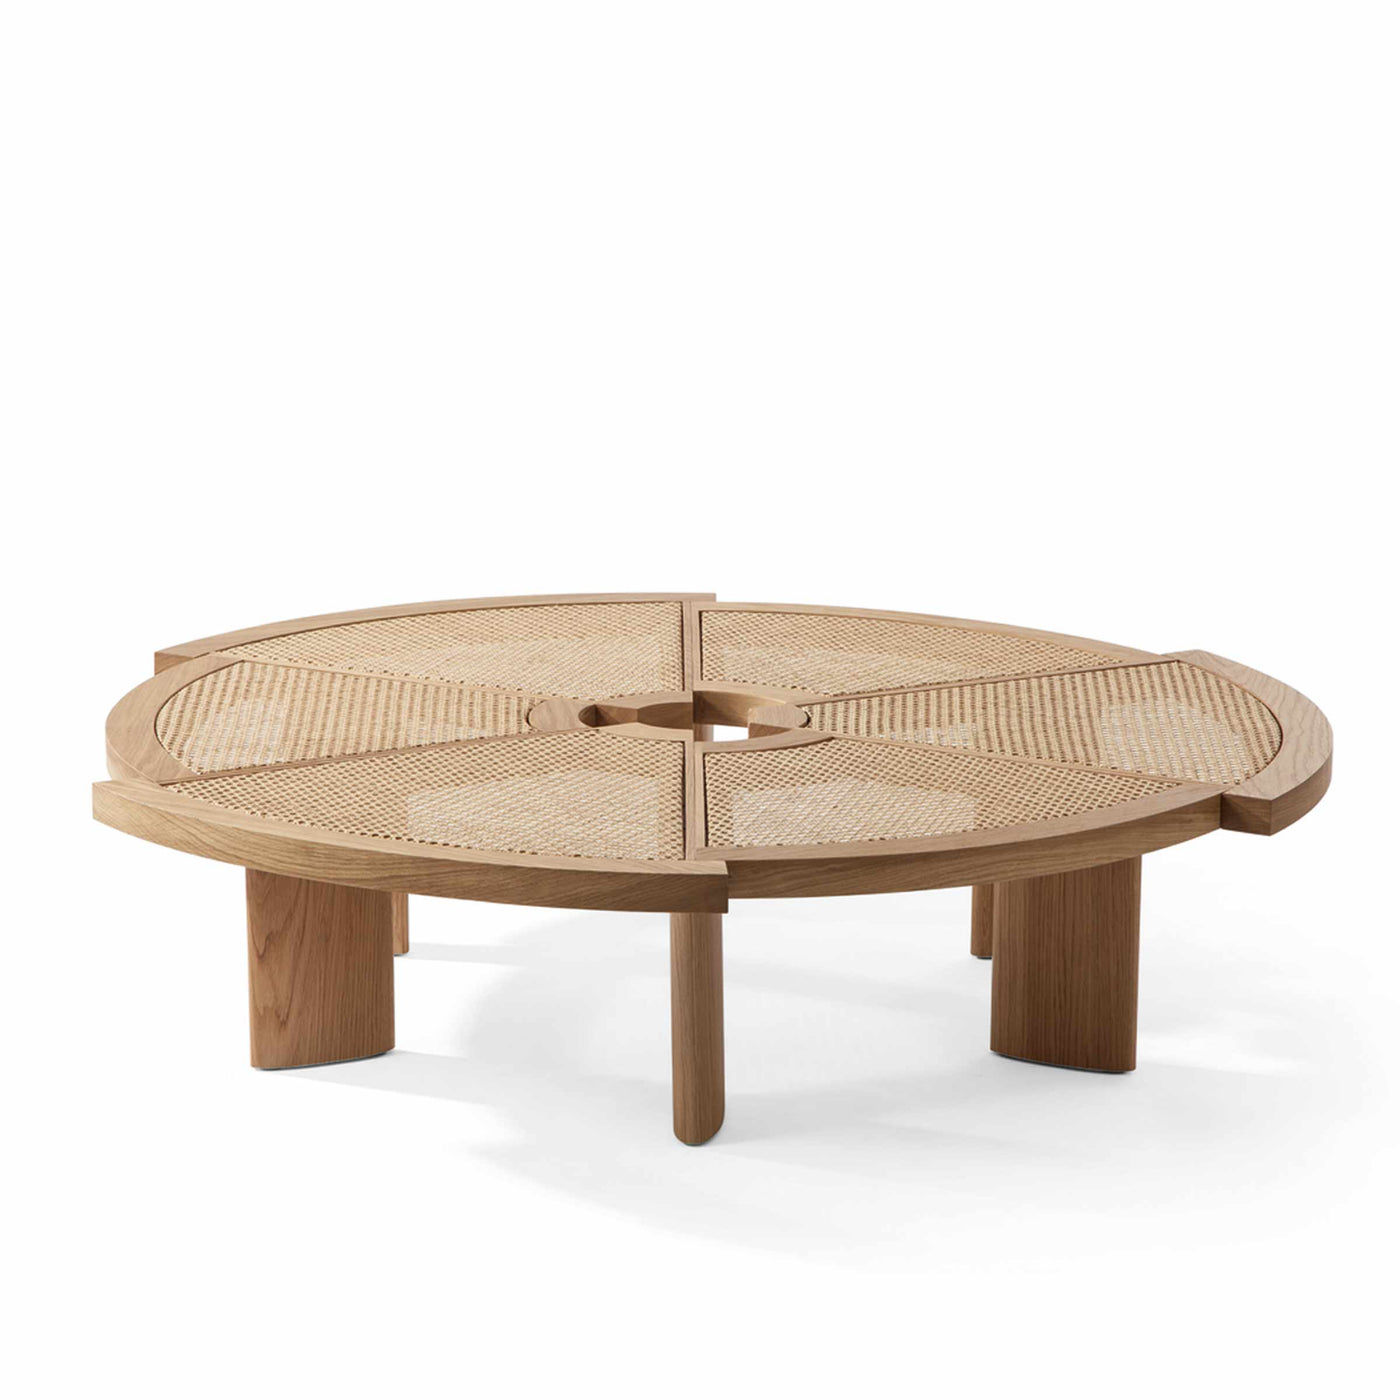 Oak Wood Coffee Table RIO, designed by Charlotte Perriand for Cassina 01